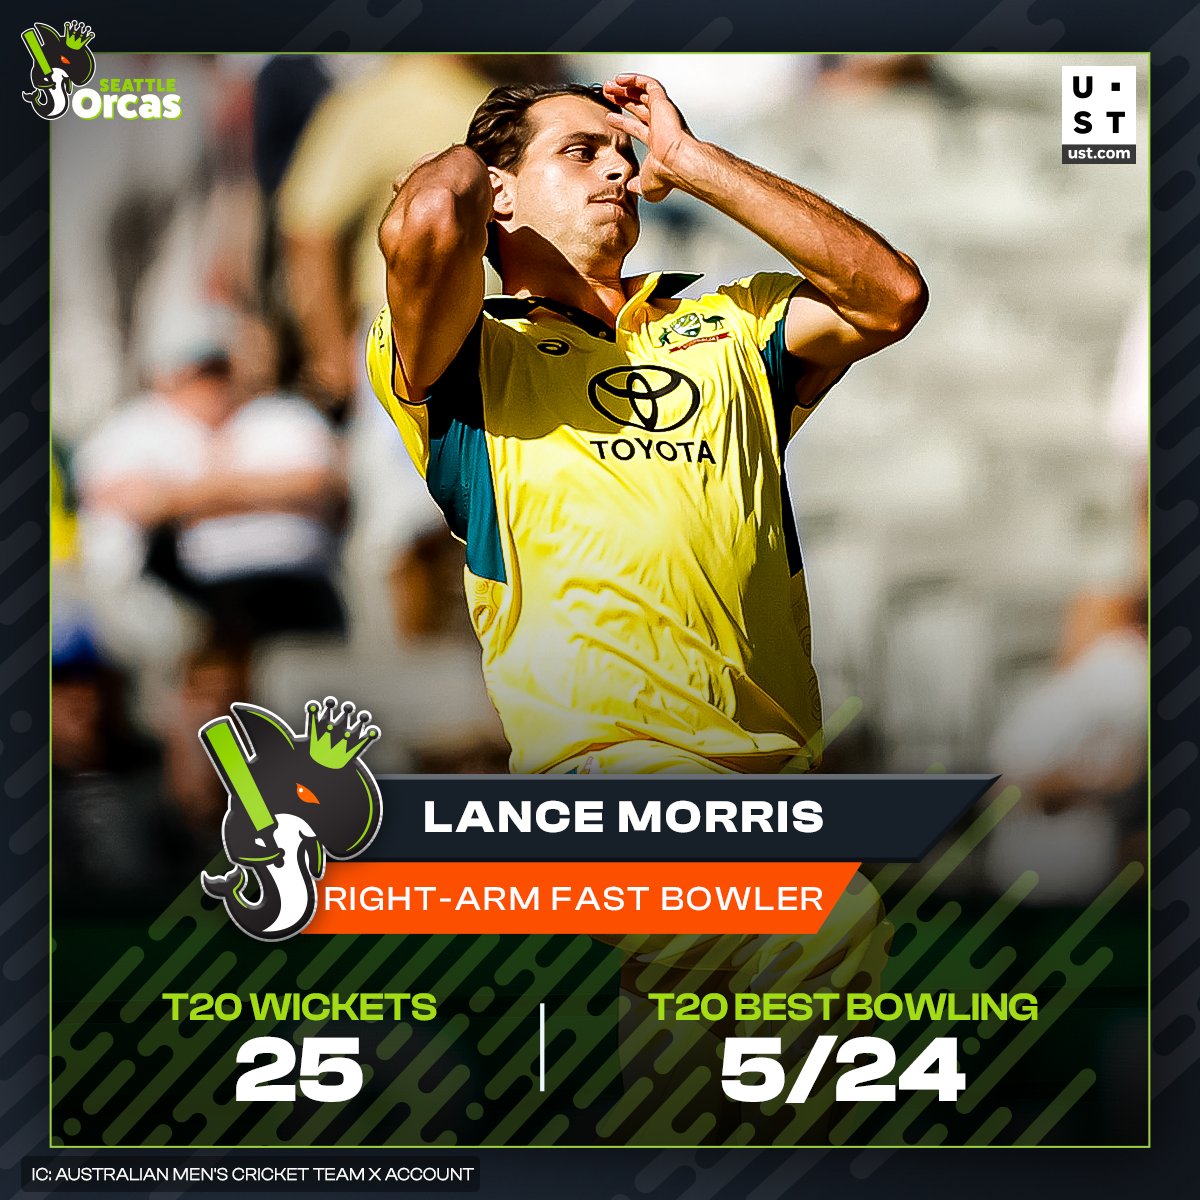 ᴛᴏᴏ ʜᴏᴛ ᴛᴏ ʜᴀɴᴅʟᴇ🥵

Lance Morris is here to unleash the wildness with his ⚡ pace in #MLC Season 2️⃣! 🔥

#SeattleOrcas #MajorLeagueCricket #AFCT | @USTglobal